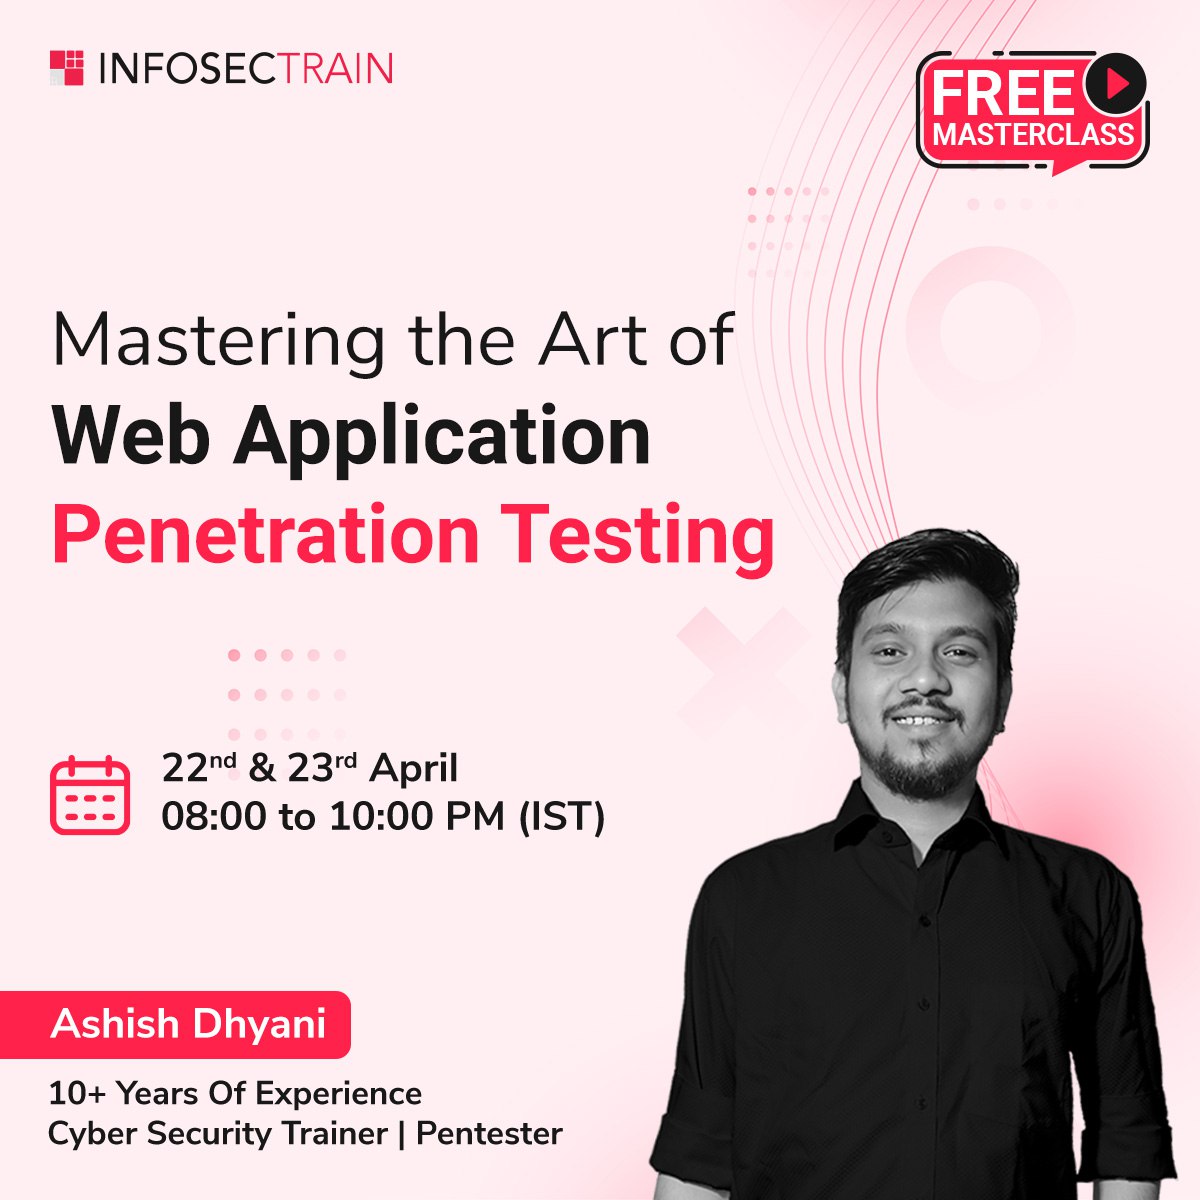 Free Masterclass: Mastering the Art of Web Application Penetration Testing, Online Event